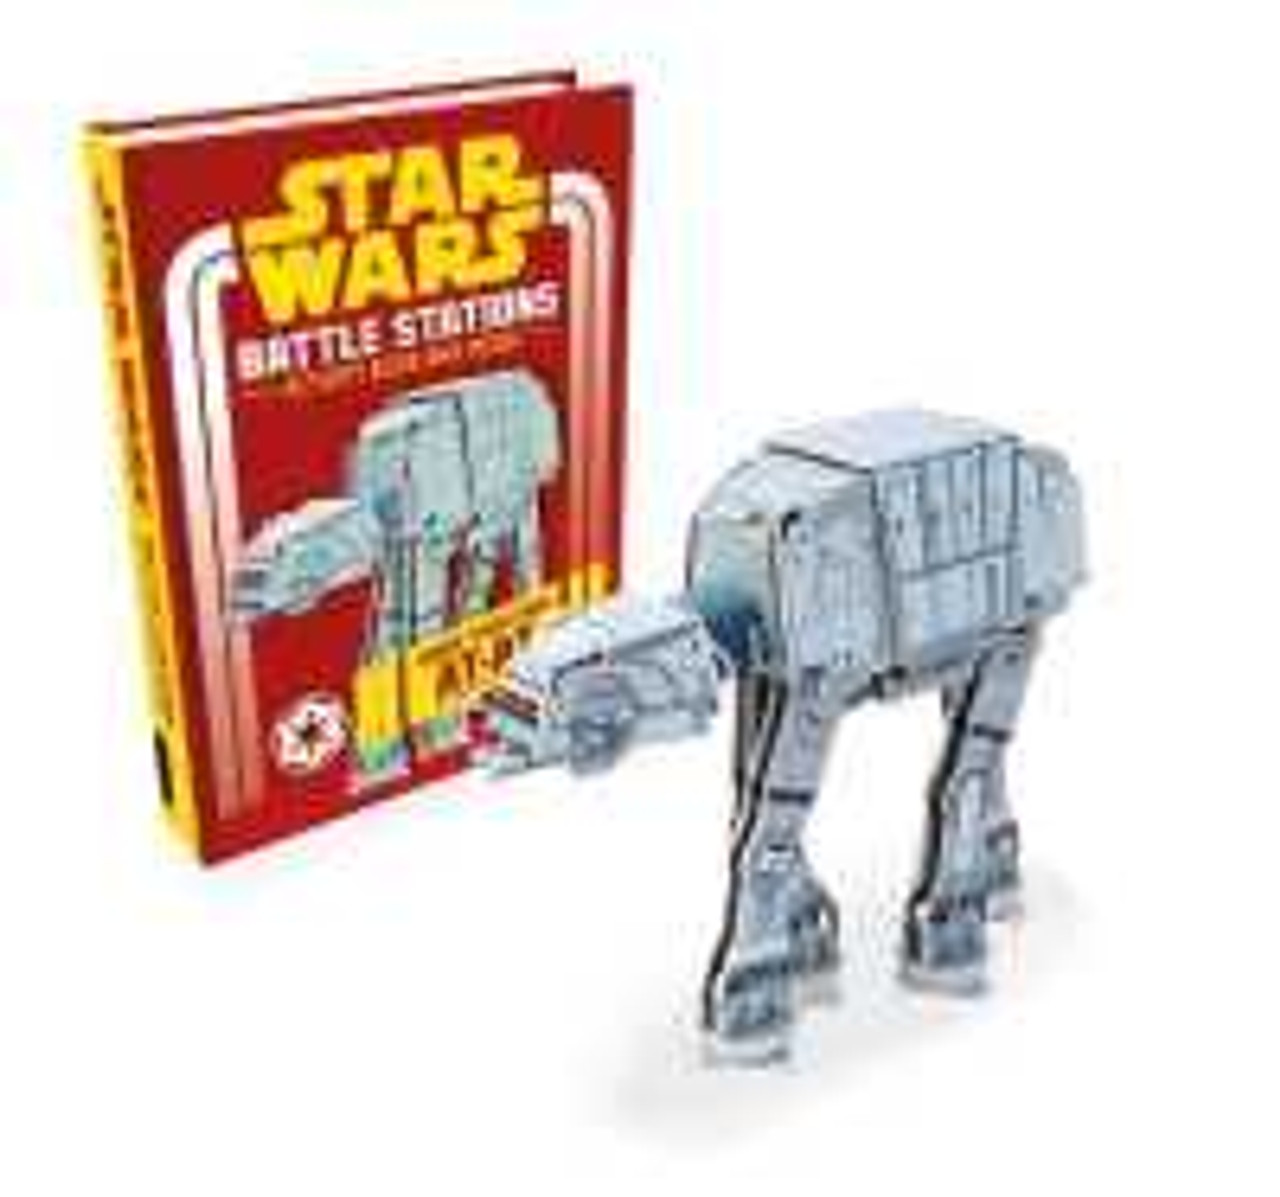 Star Wars Battle Stations - activity book and model.  Make your own AT-AT.